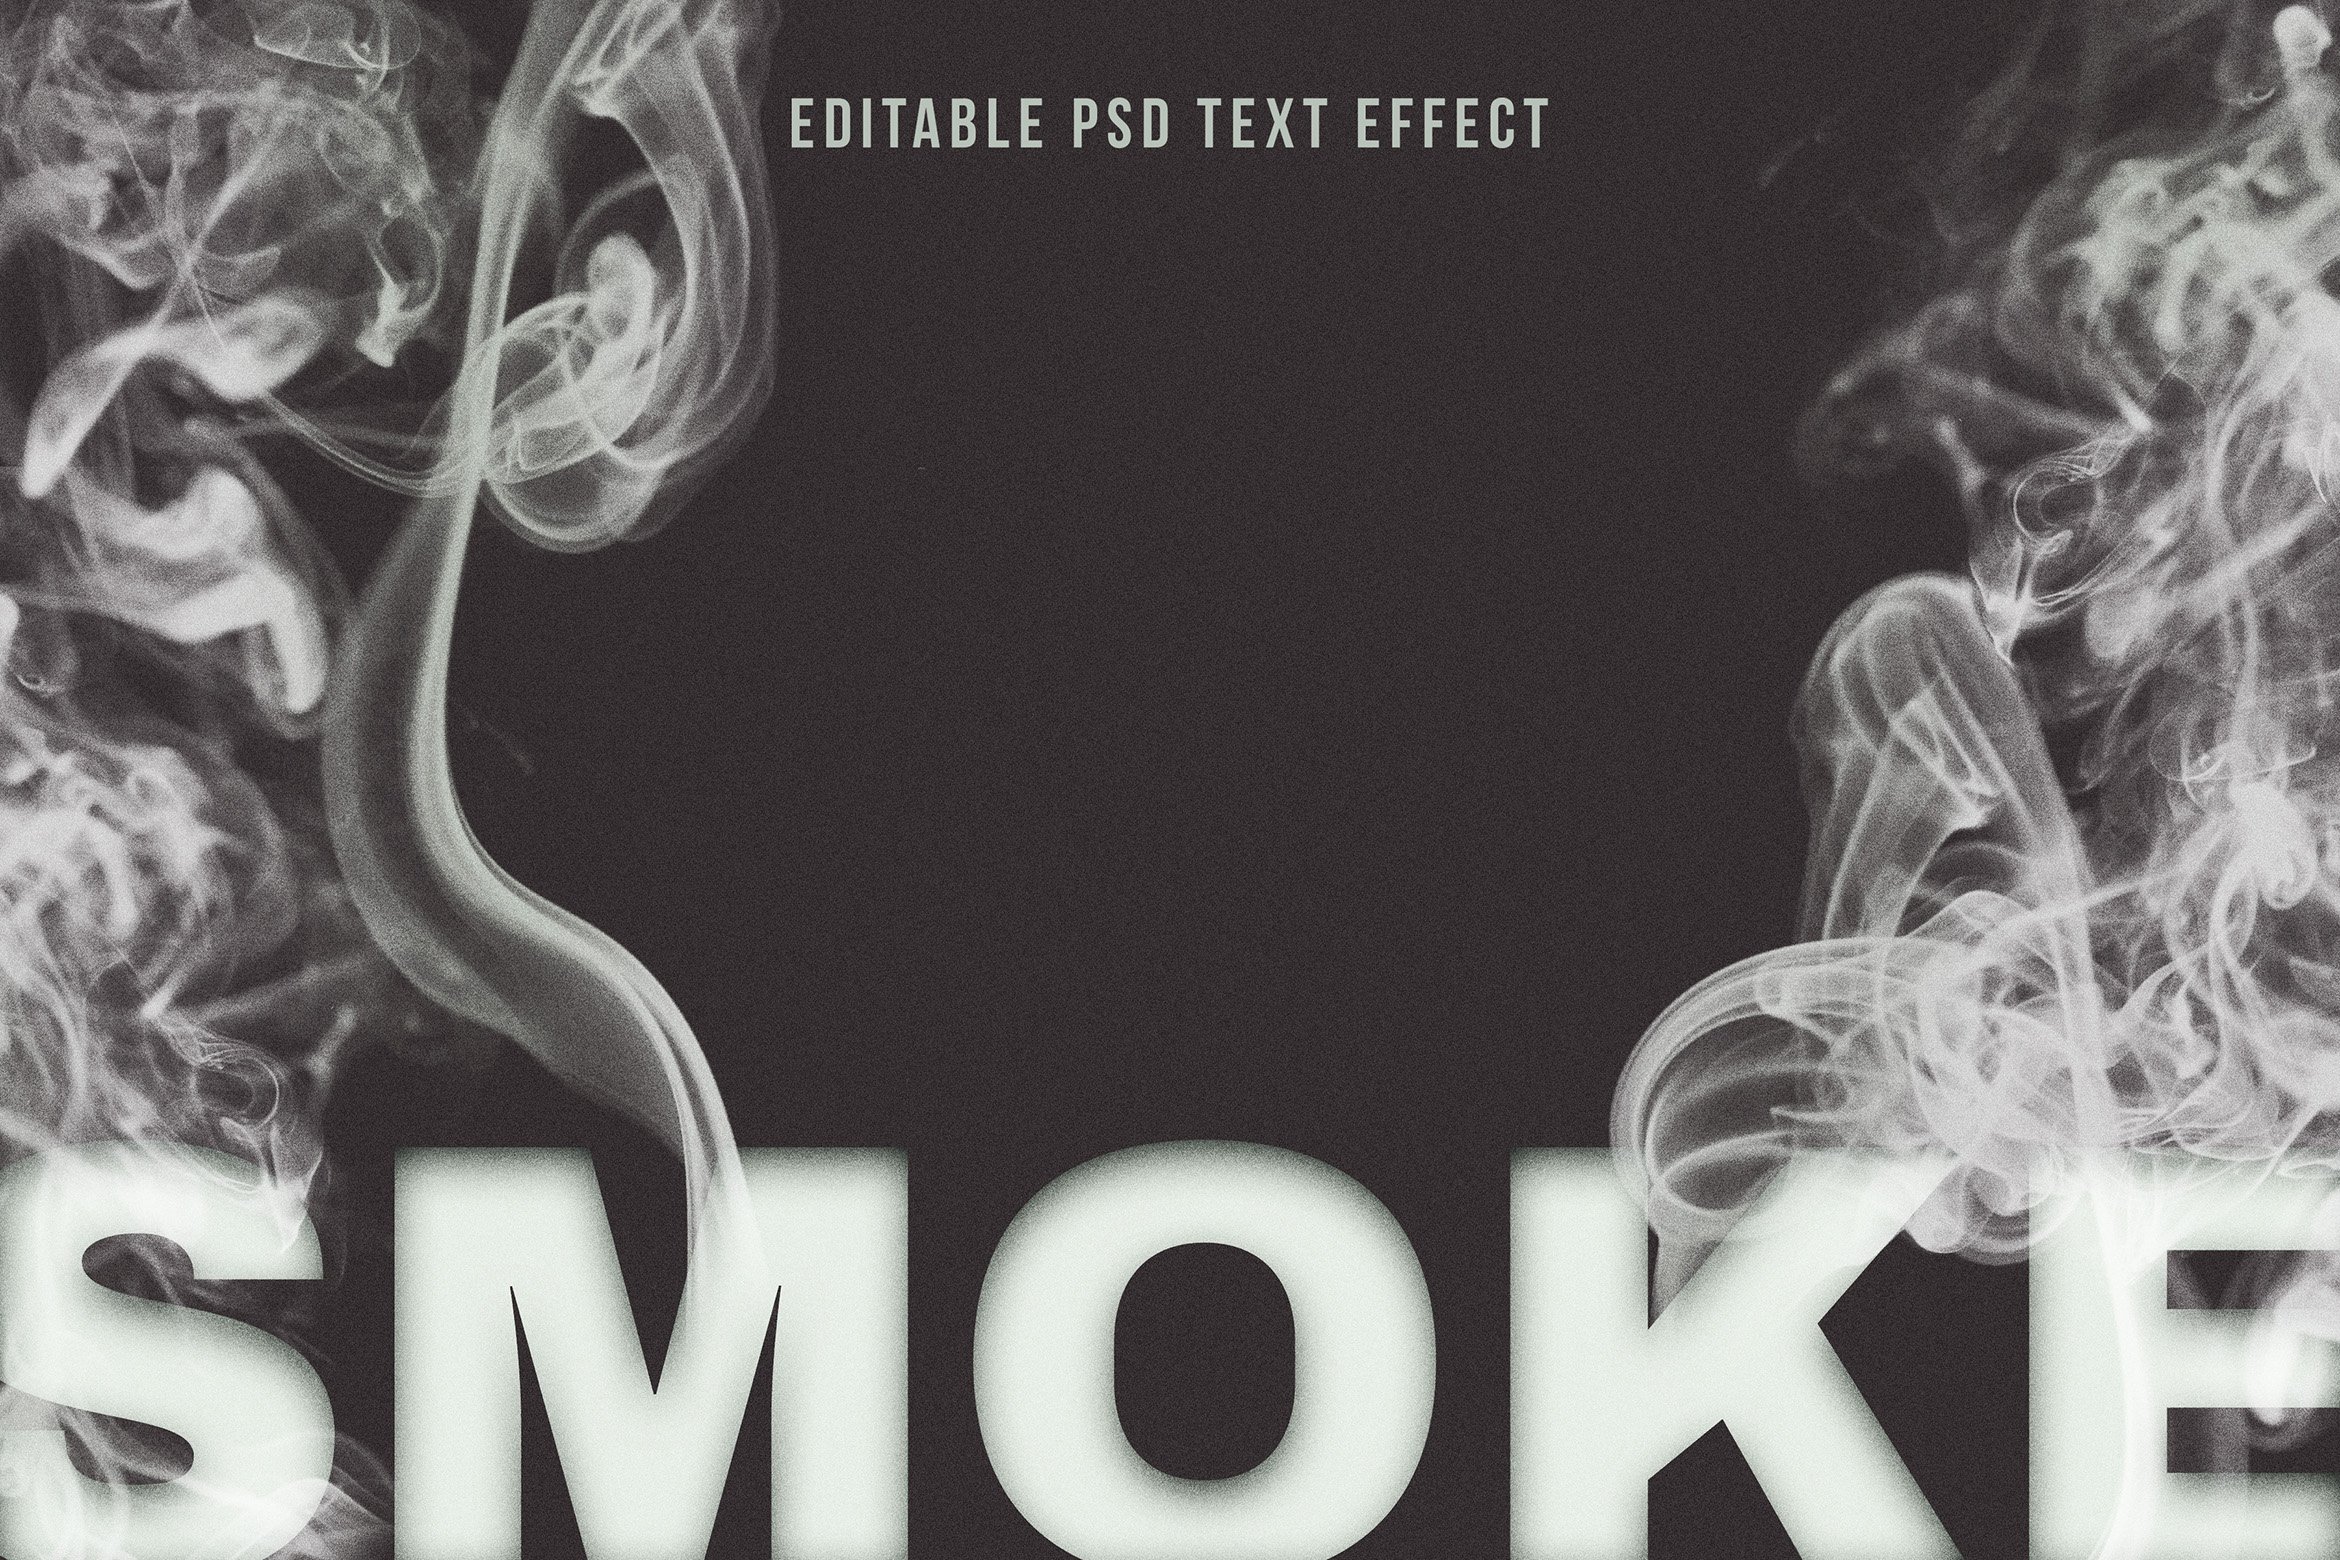 Text Effect Smokecover image.